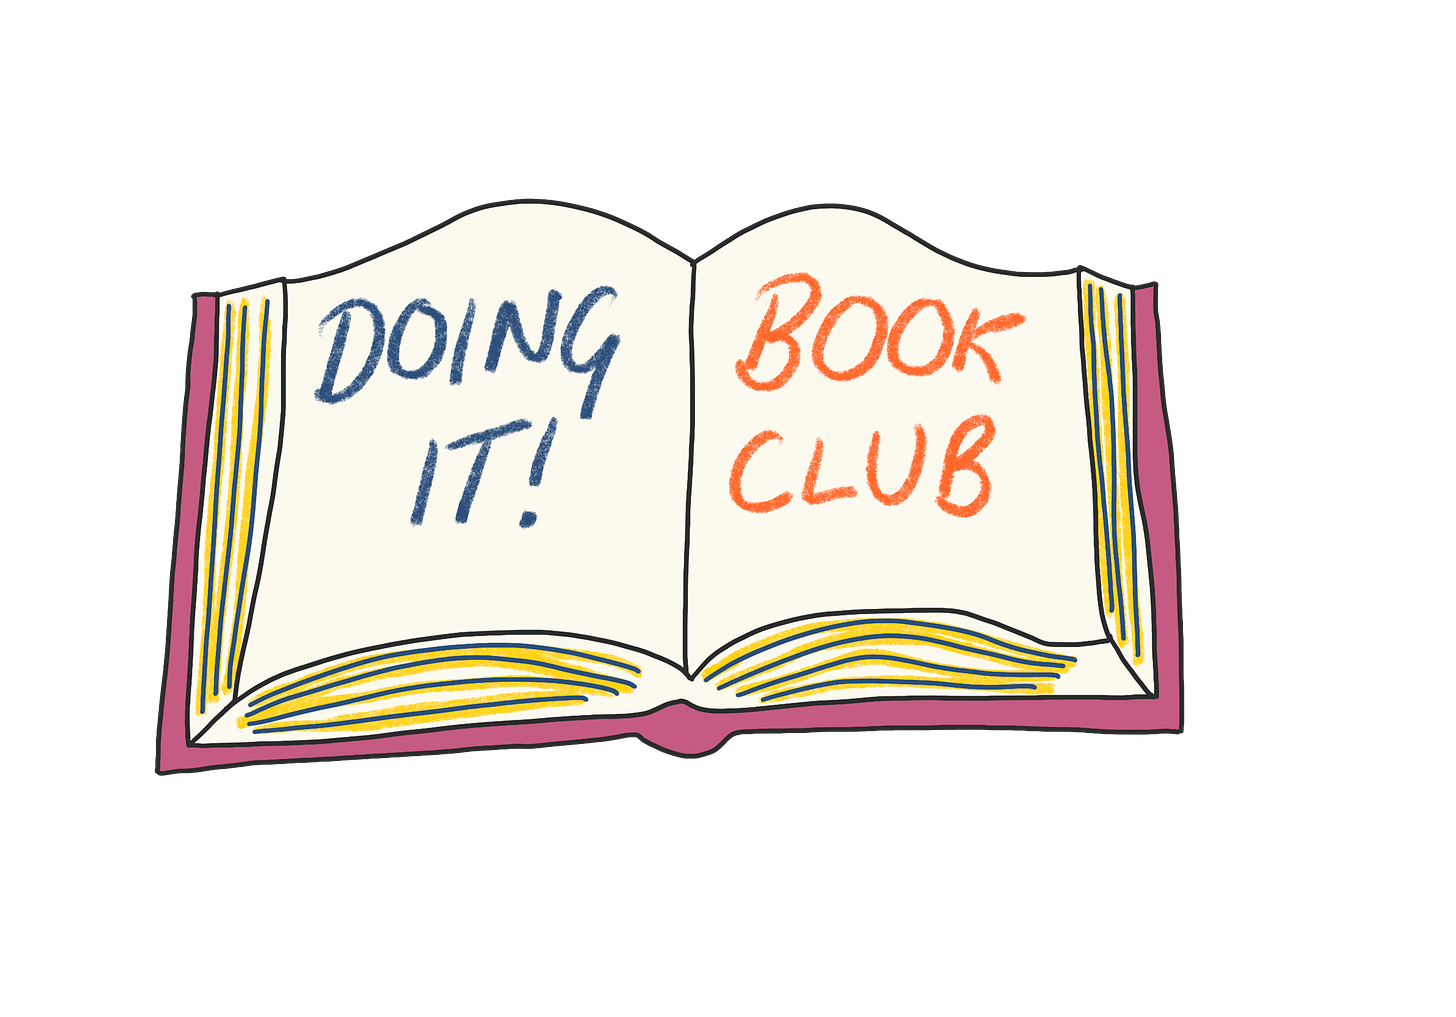 An illustration of an open book with the words Doing It on one open page and Book Club on the other